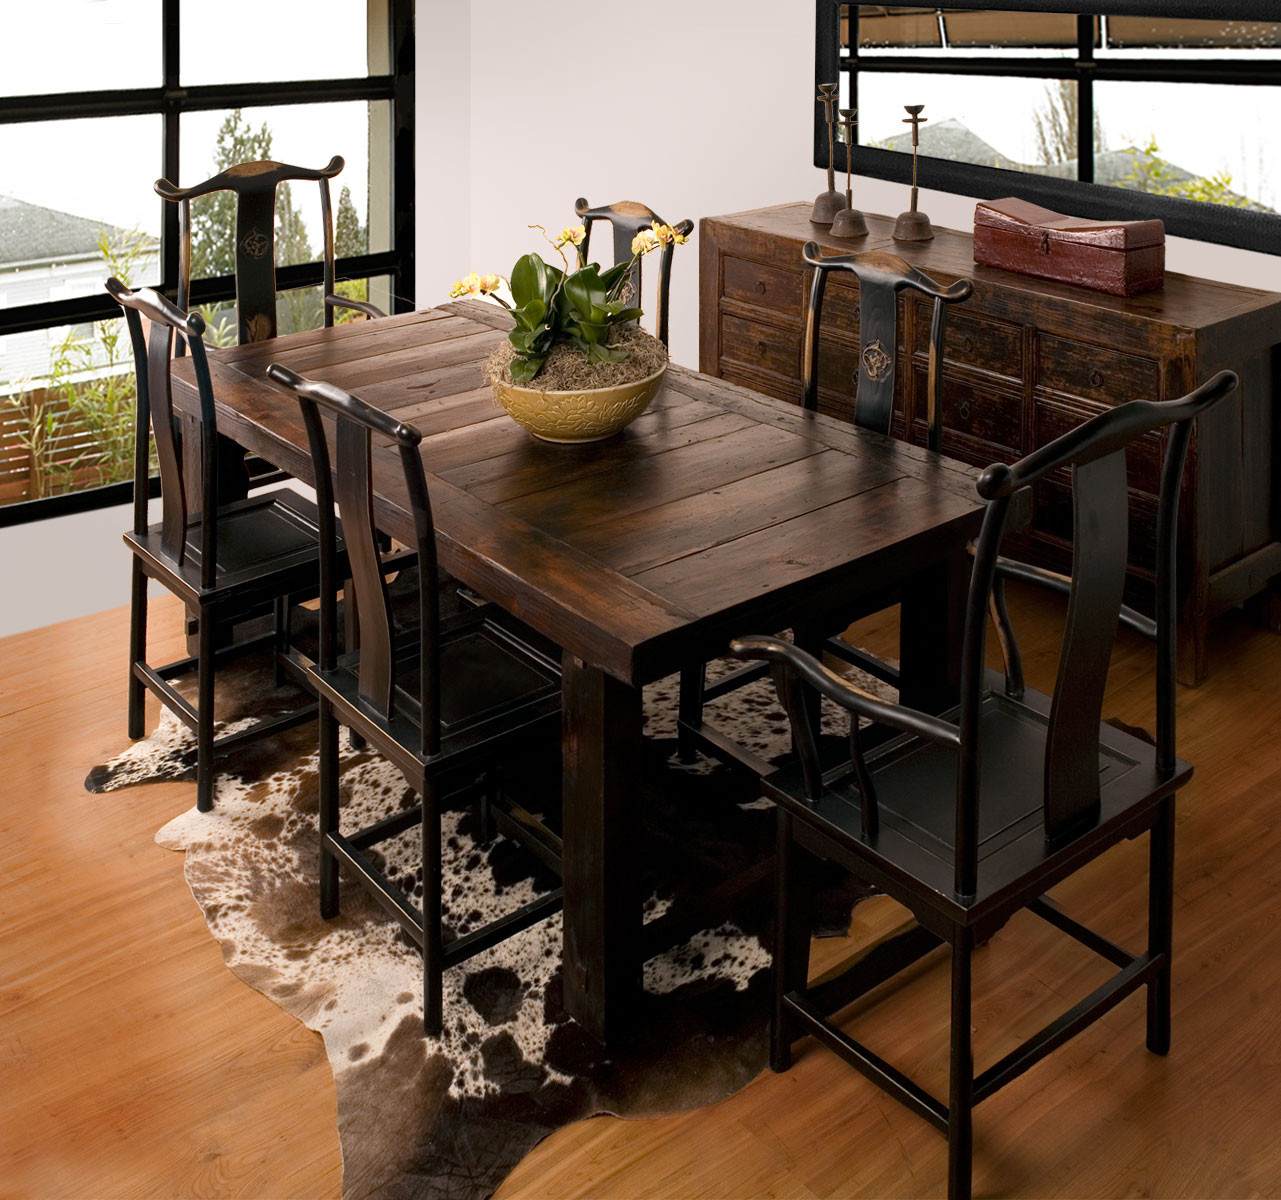 Kitchen Tables Rustic
 New Rustic Dining Room Tables Ideas Amaza Design